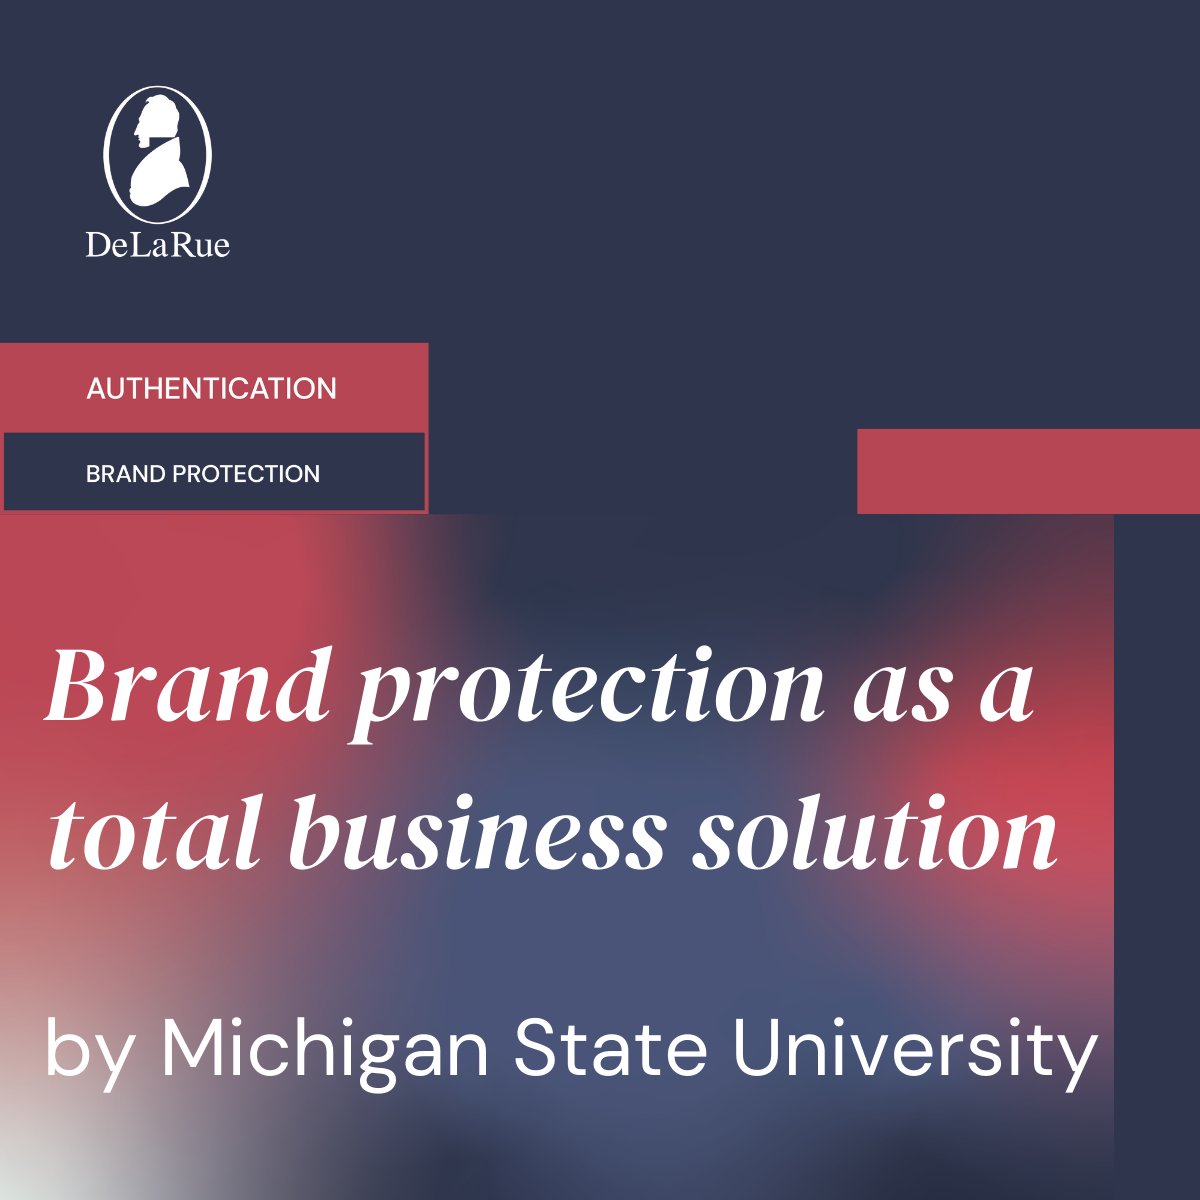 Reputation of a brand drives how the products will perform in the marketplace. Damage to a brand is usually more expensive to recover from than proactively taking steps to protect it. hubs.ly/Q02mHKQ10 #brandprotection #brandreputation #delarue